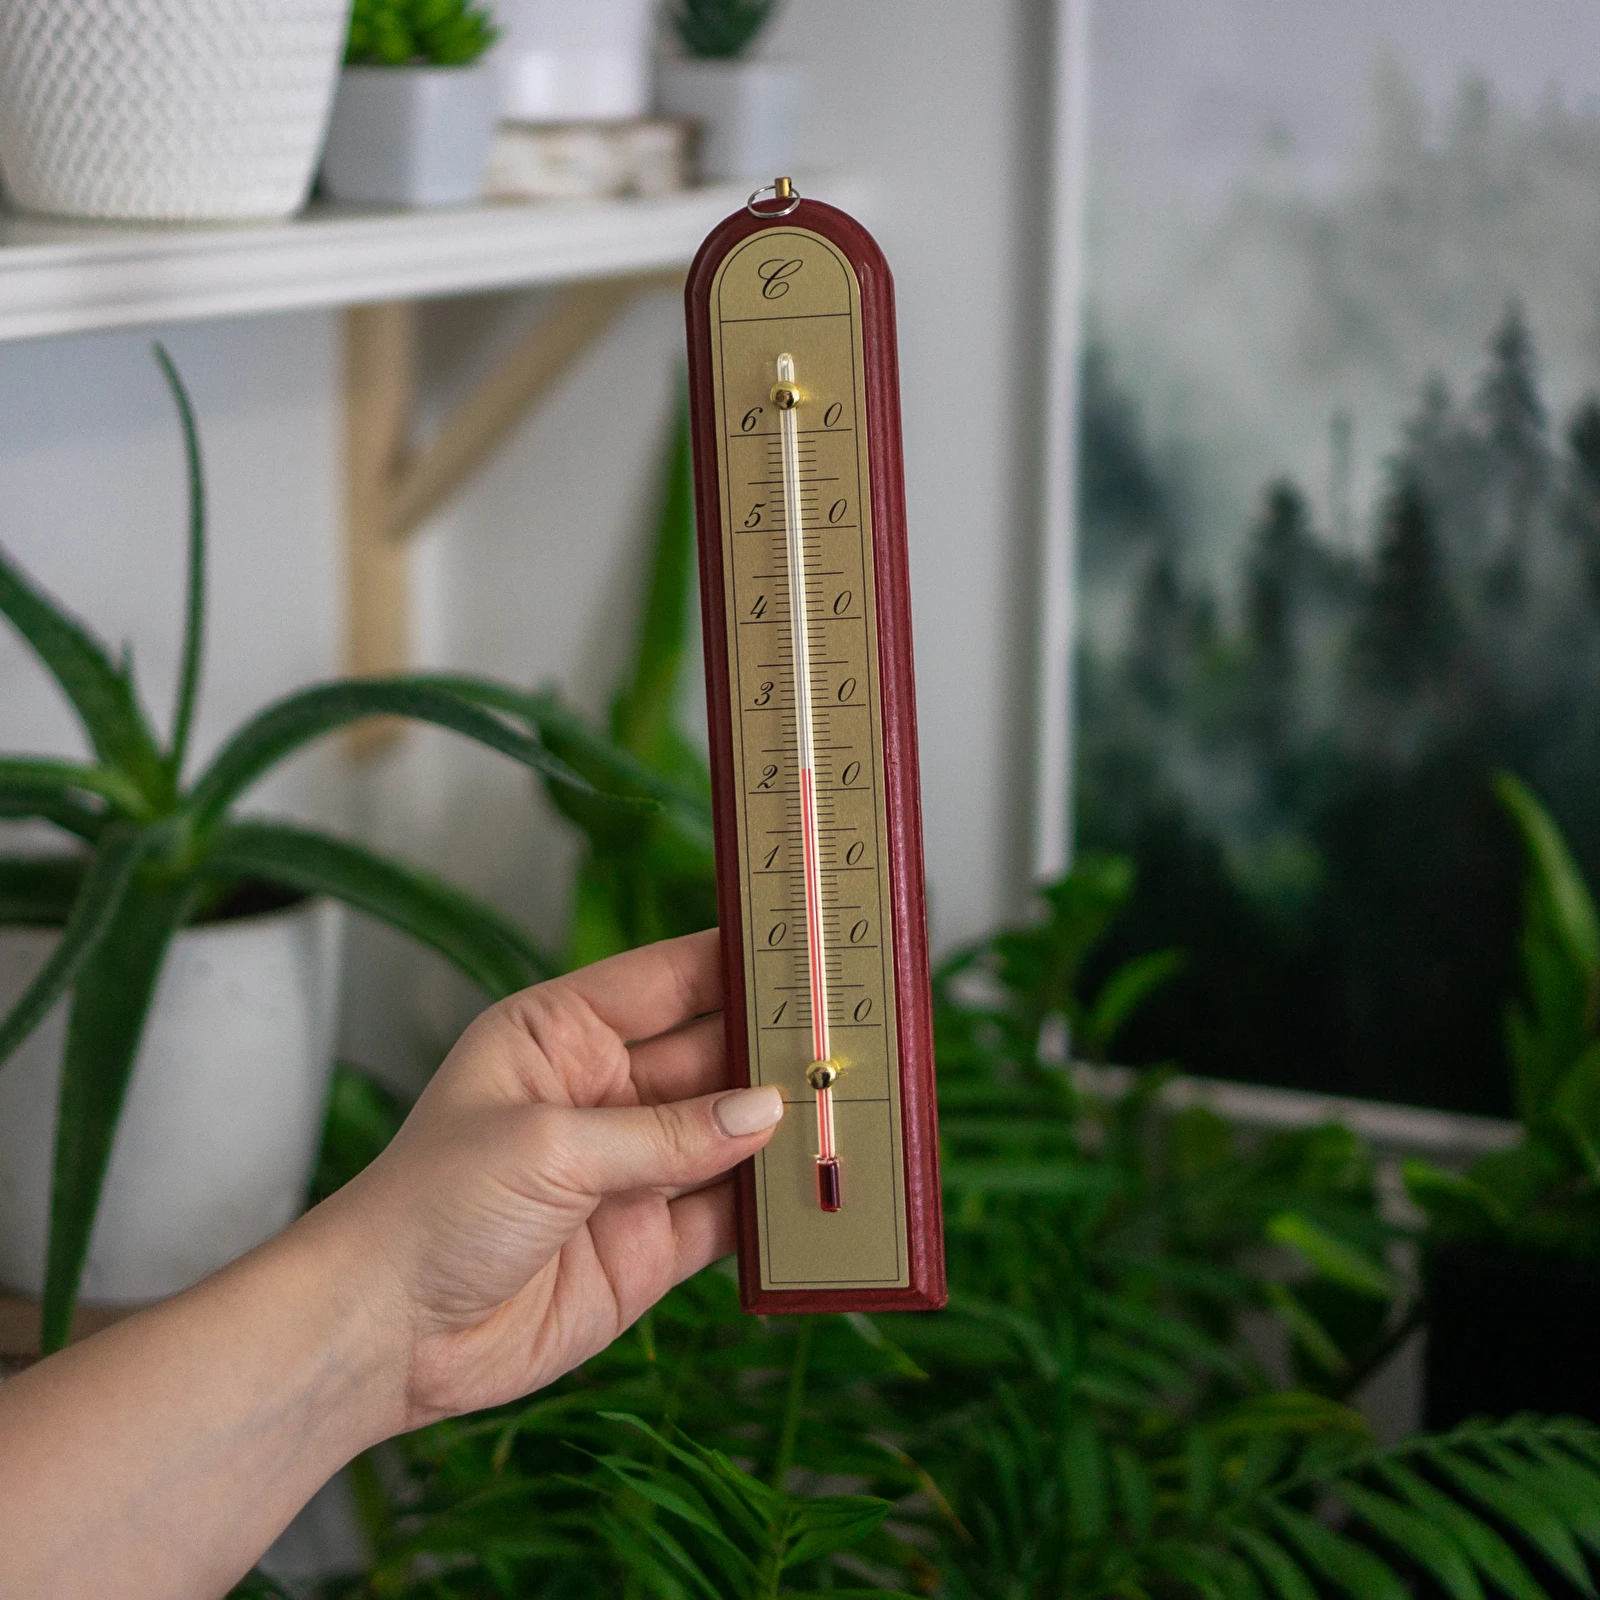 https://browin.com/static/images/1600/indoor-thermometer-with-a-golden-scale-10-c-to-60-c-28cm-mix-013200_a.webp